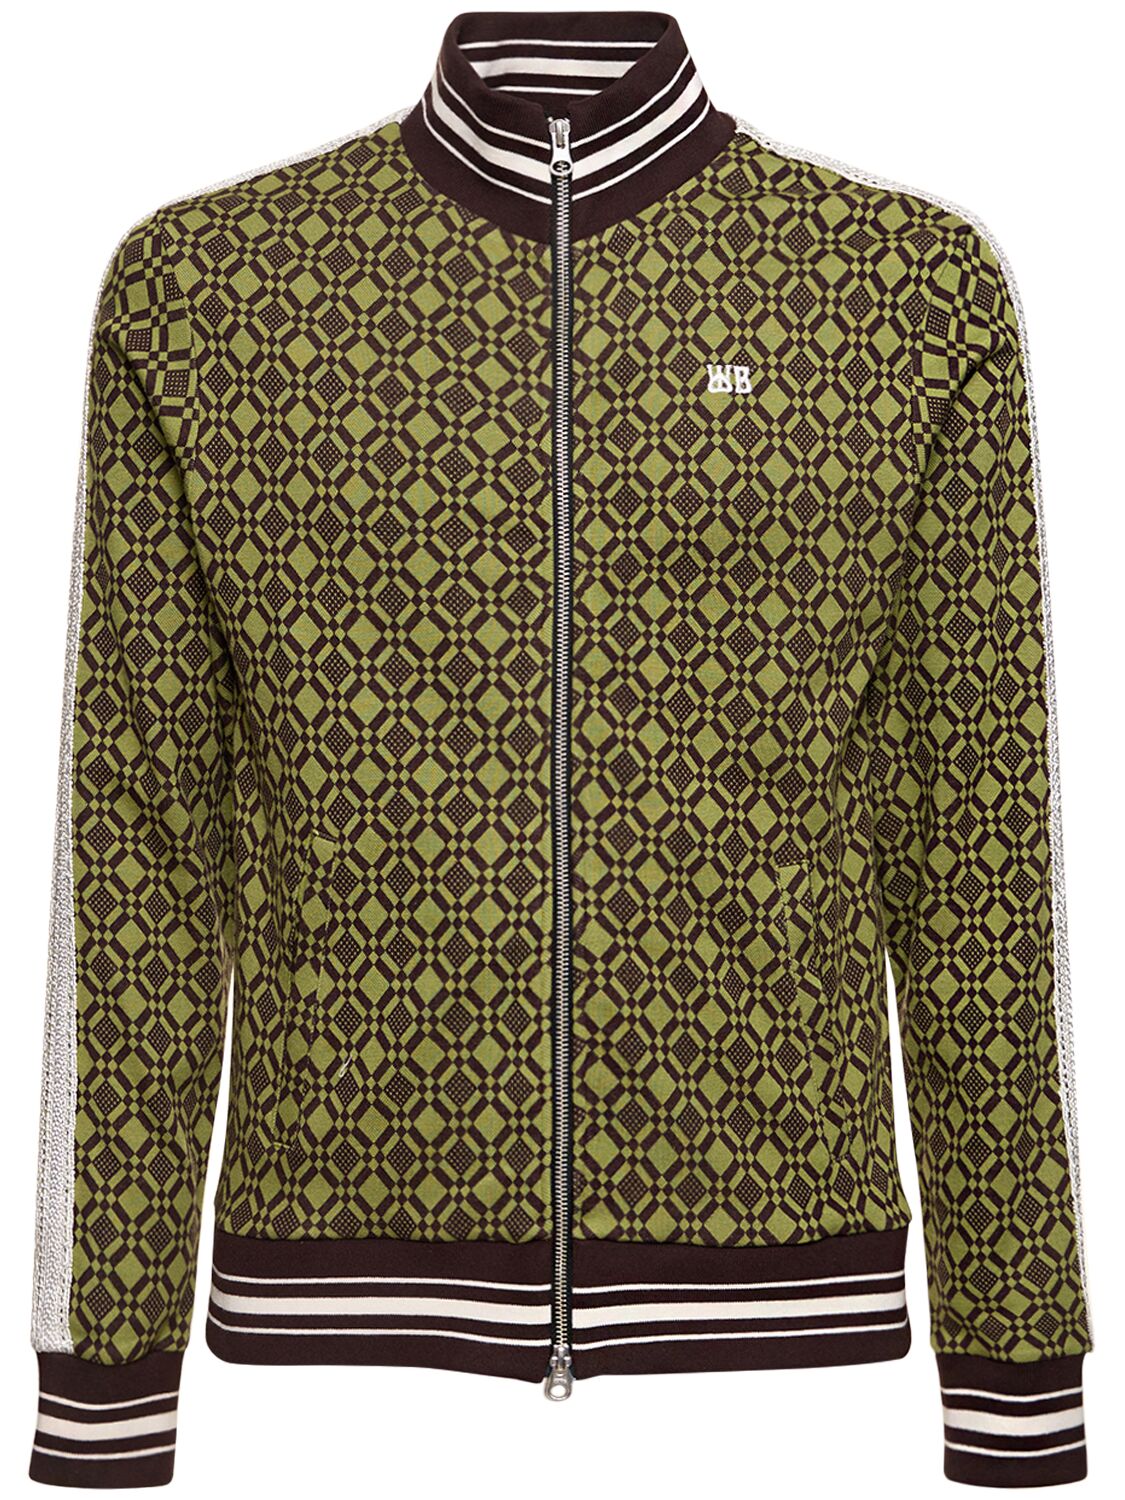 Image of Cotton Blend Jacquard Track Top